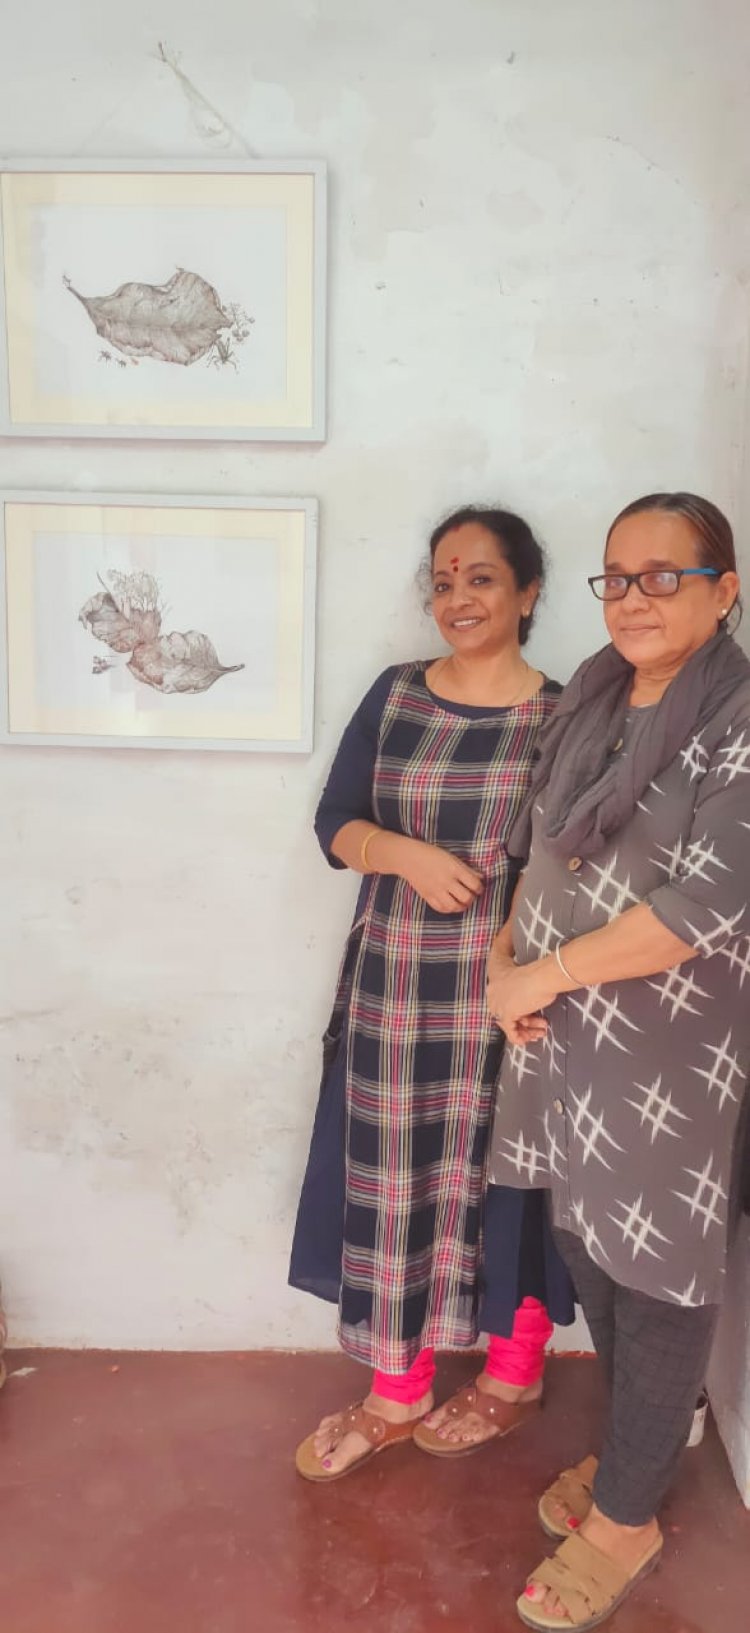 Namasthe Art Centre presents ADVENT 2nd  Exhibition of  women artist painting and sculpture started on 24th December 2021.